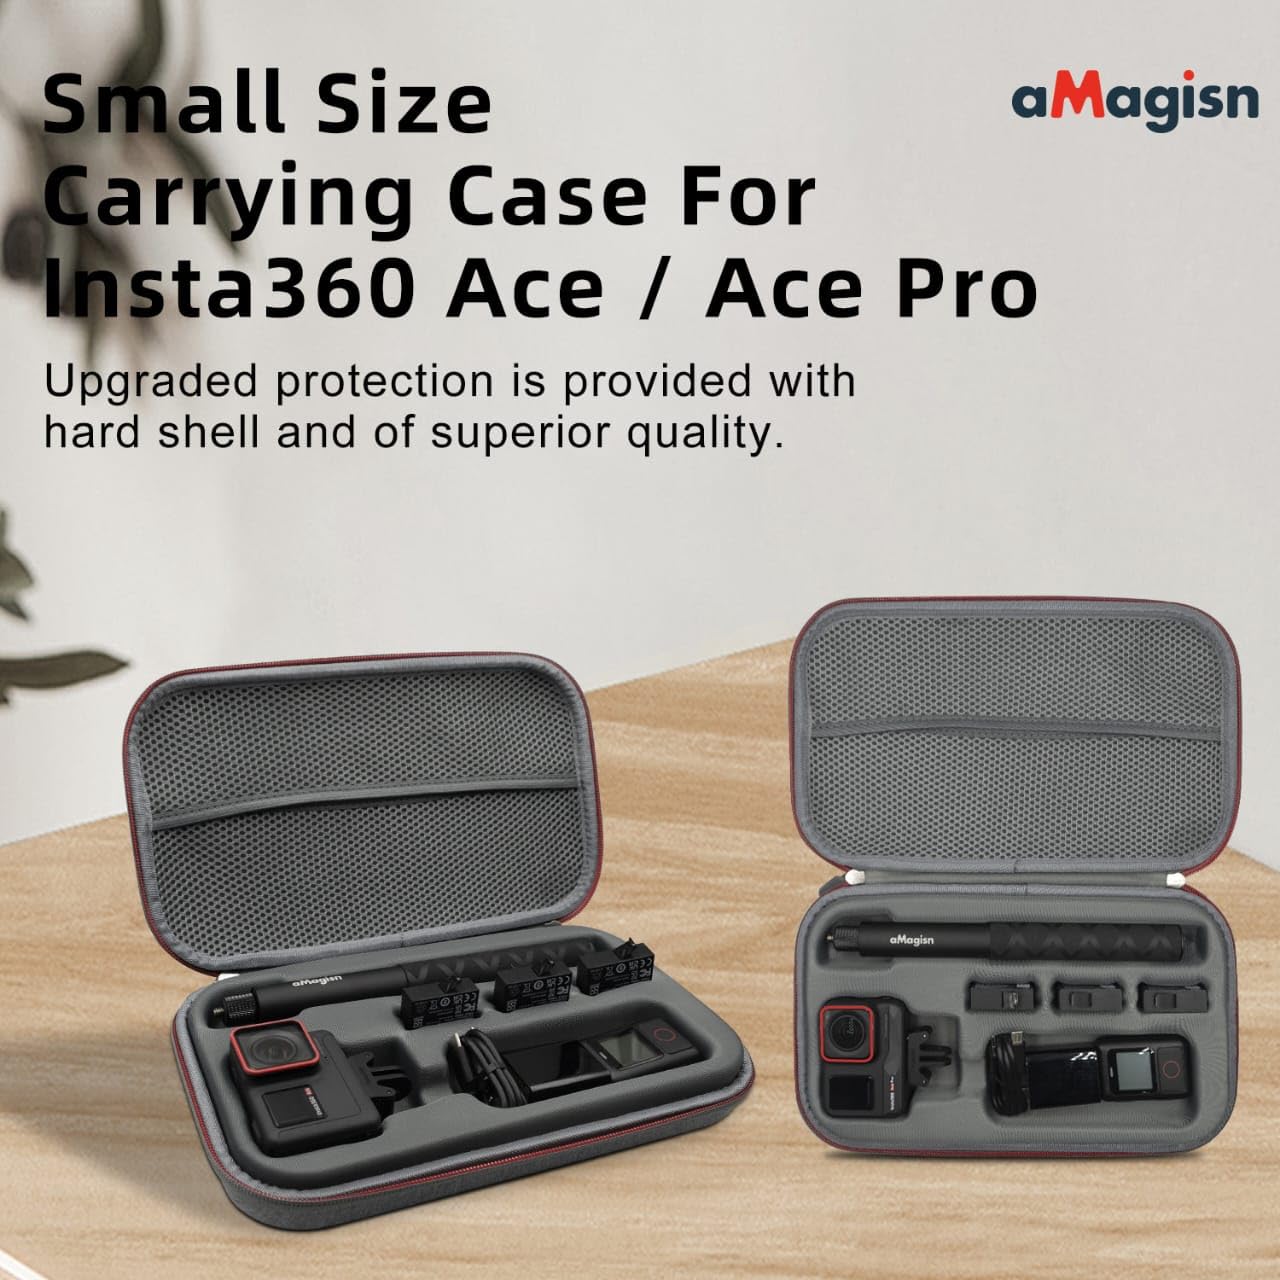 Amagisn Carrying Case Bag for Insta360 Ace Pro, Go3, X3 & Accessories